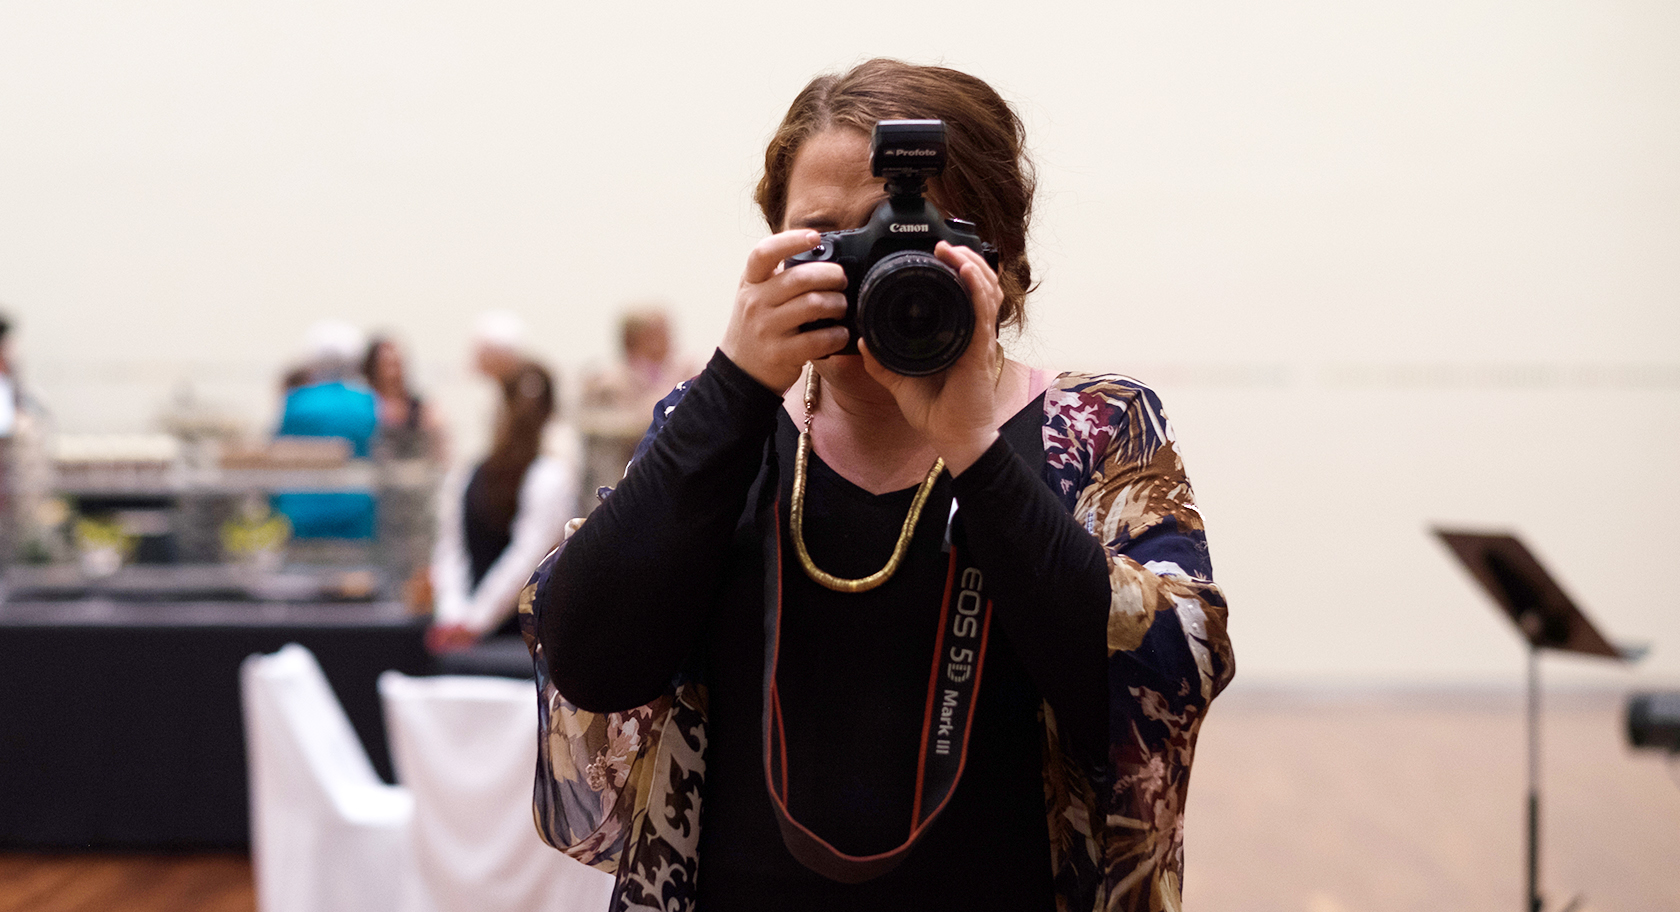 A woman has a camera in her hand, covering her face as she looks through the lens to take a photo.